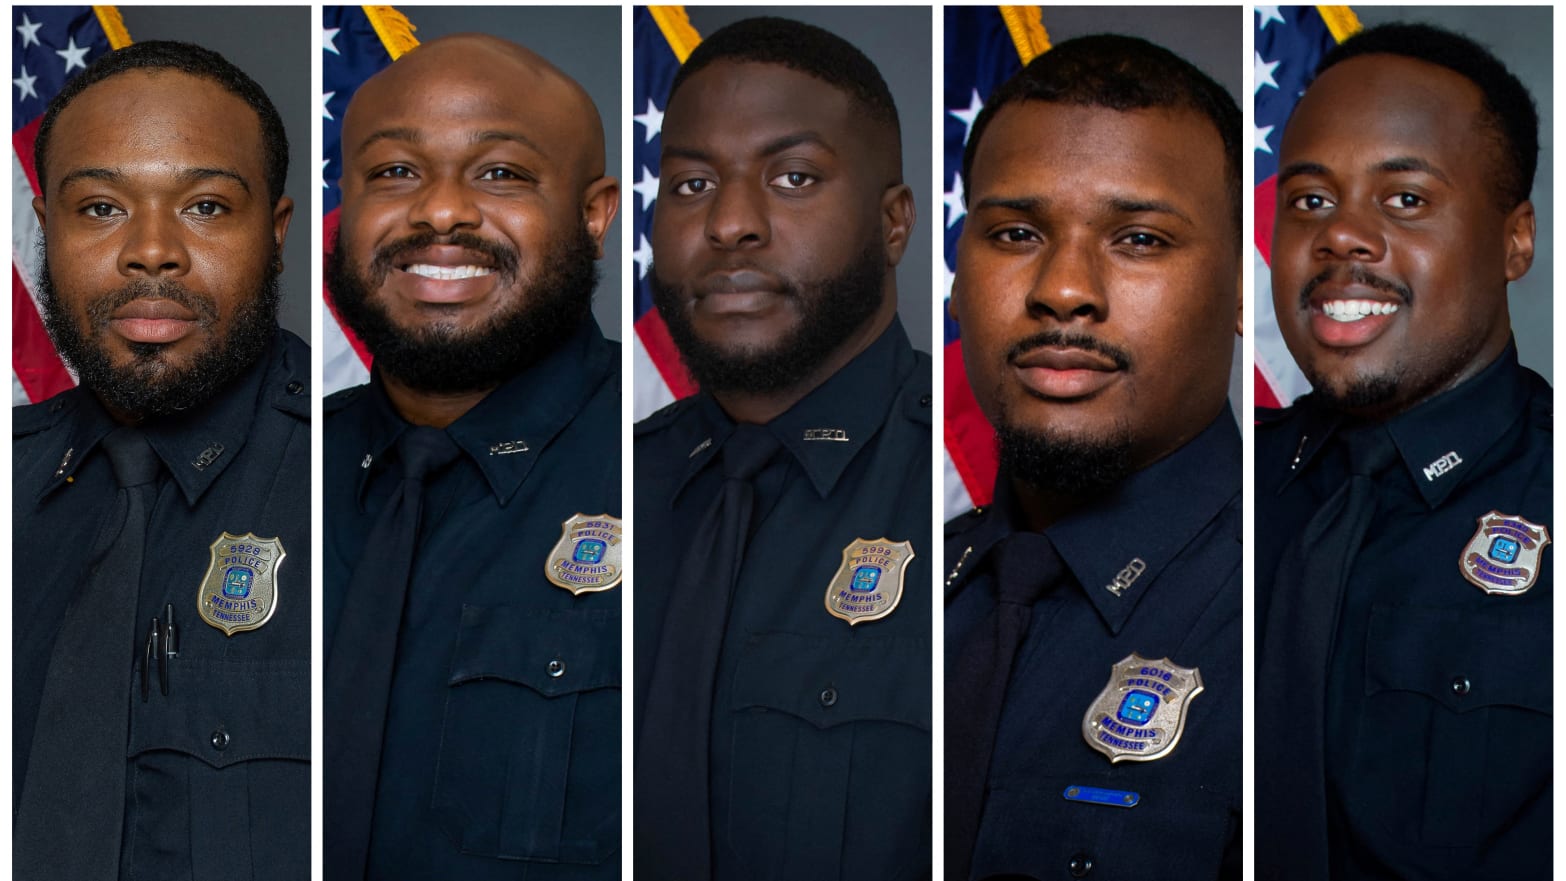 Officers who were terminated after their involvement in a traffic stop that ended with the death of Tyre Nichols